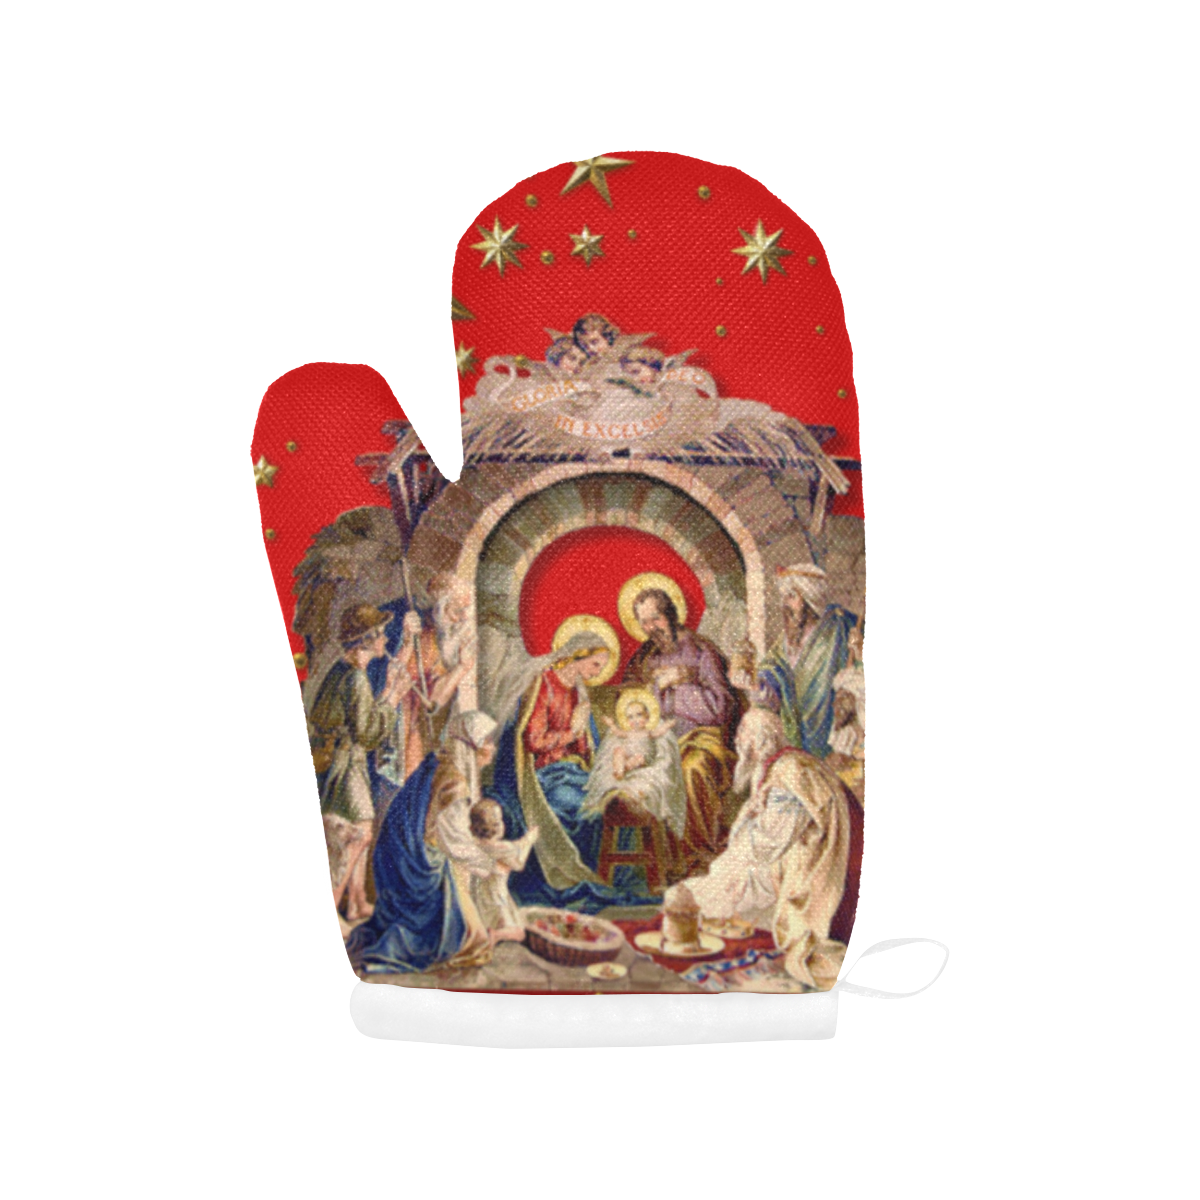 Nativity Oven Mittens Red Oven Mitt (Two Pieces)